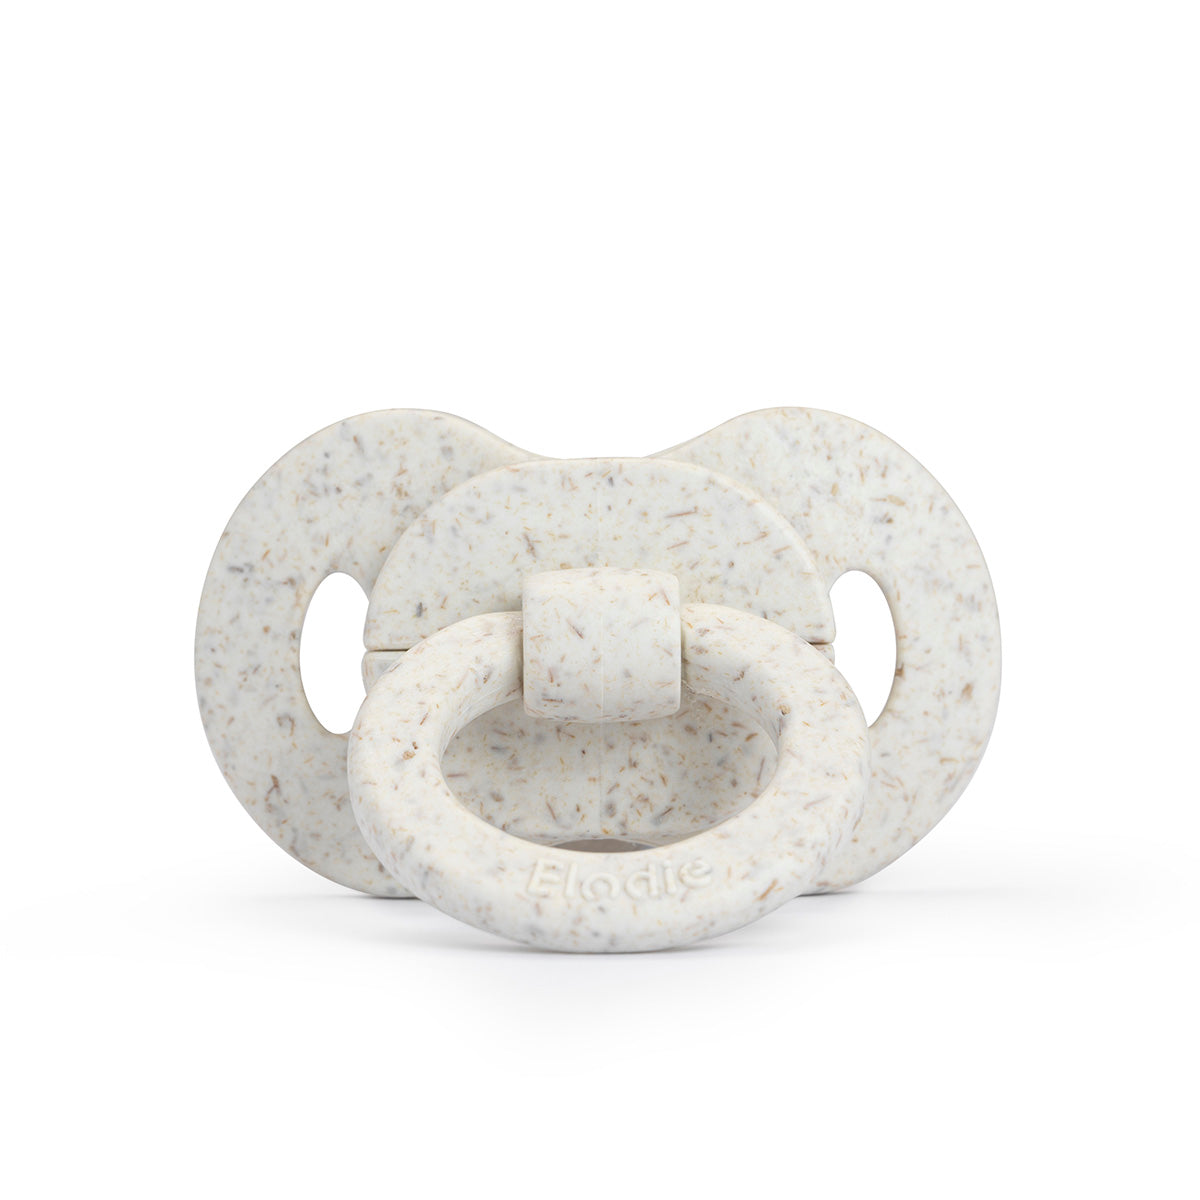 Bamboo Pacifier Orthodontic 0-6 months - Vanilla White